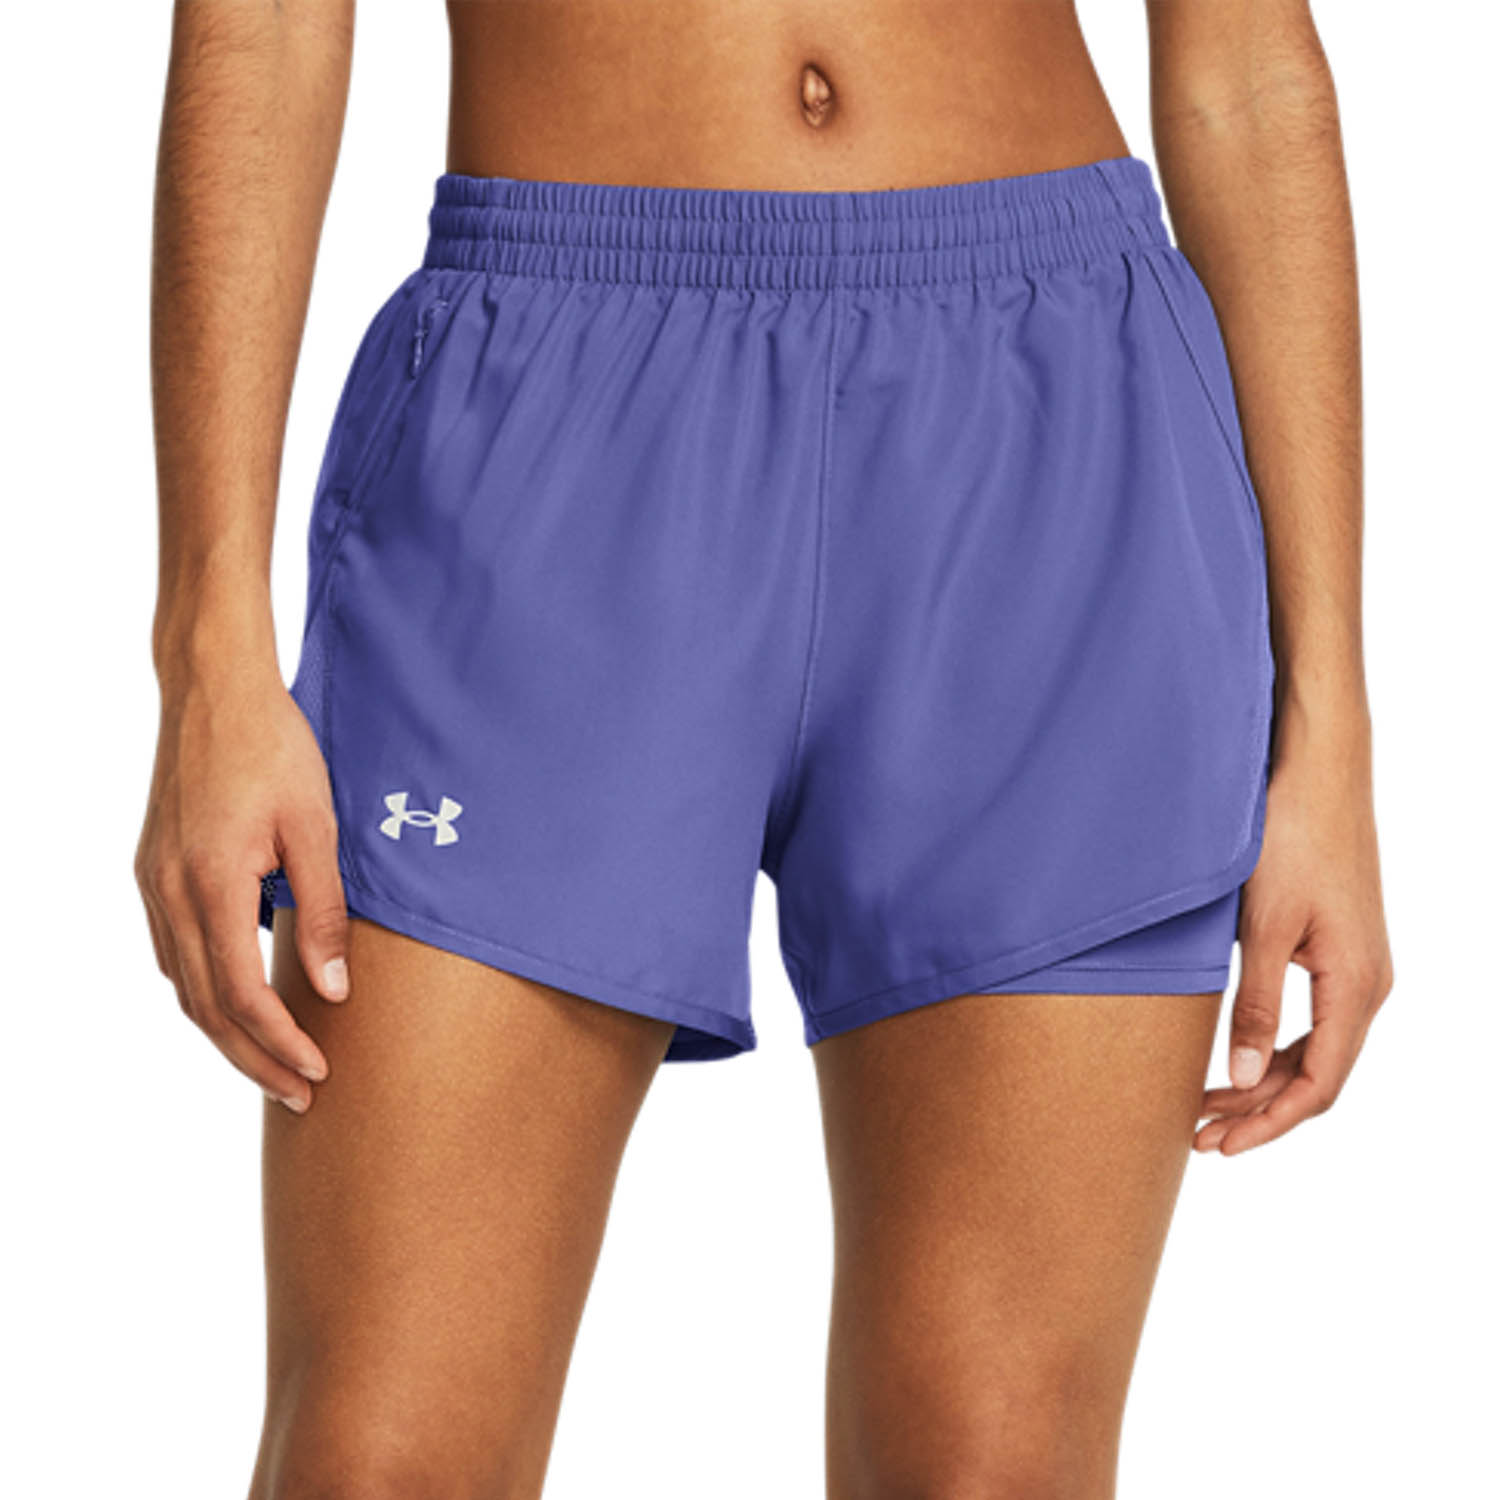 Under Armour Fly By 2 in 1 4in Shorts - Starlight/Reflective